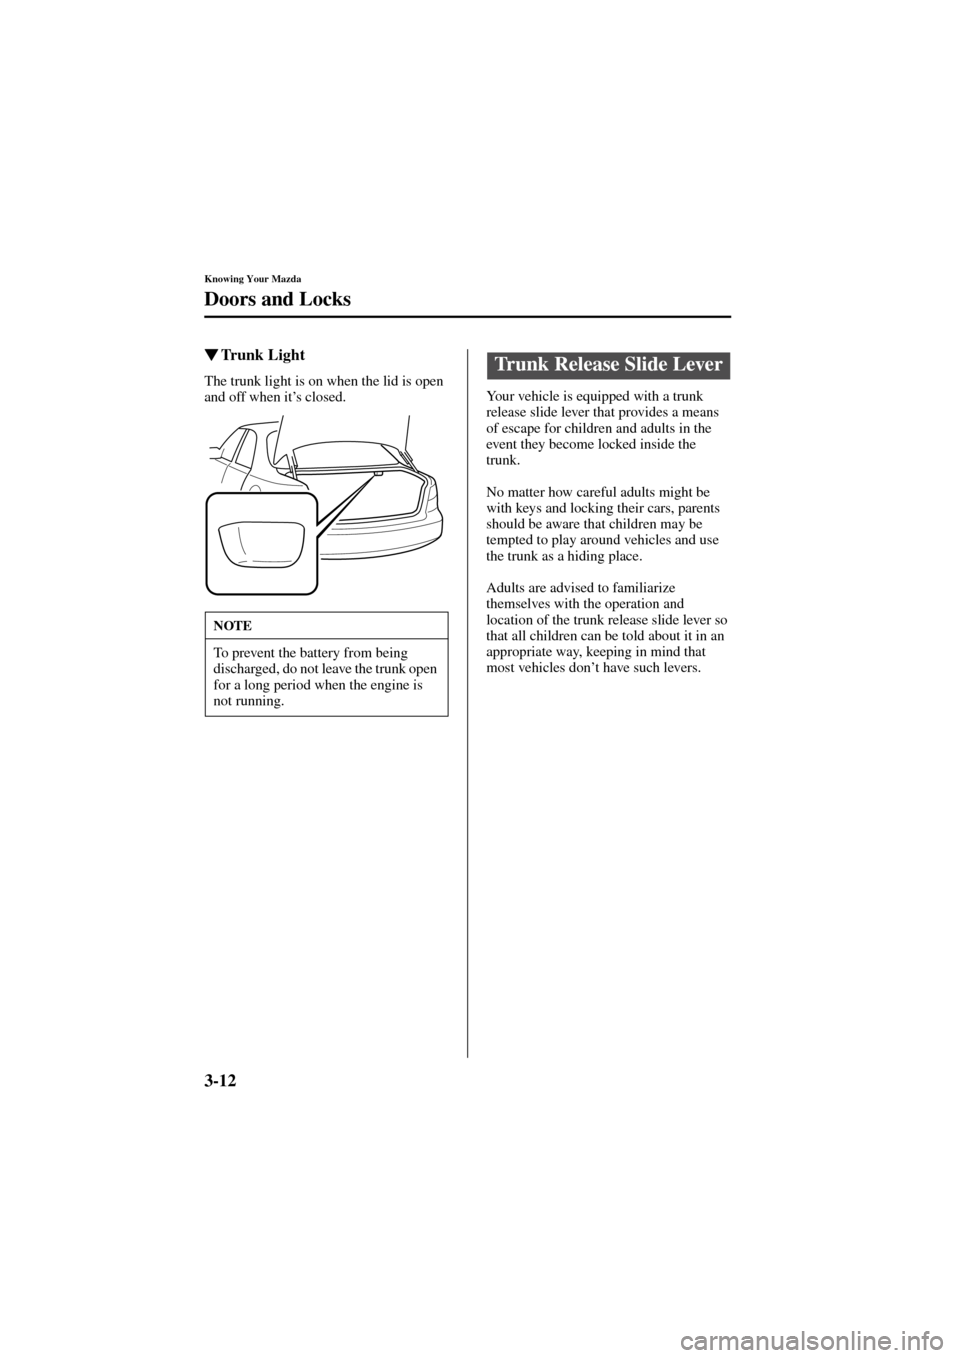 MAZDA MODEL 6 2004   (in English) User Guide 3-12
Knowing Your Mazda
Doors and Locks
Form No. 8R29-EA-02I
Trunk Light
The trunk light is on when the lid is open 
and off when it’s closed.Your vehicle is equipped with a trunk 
release slide le